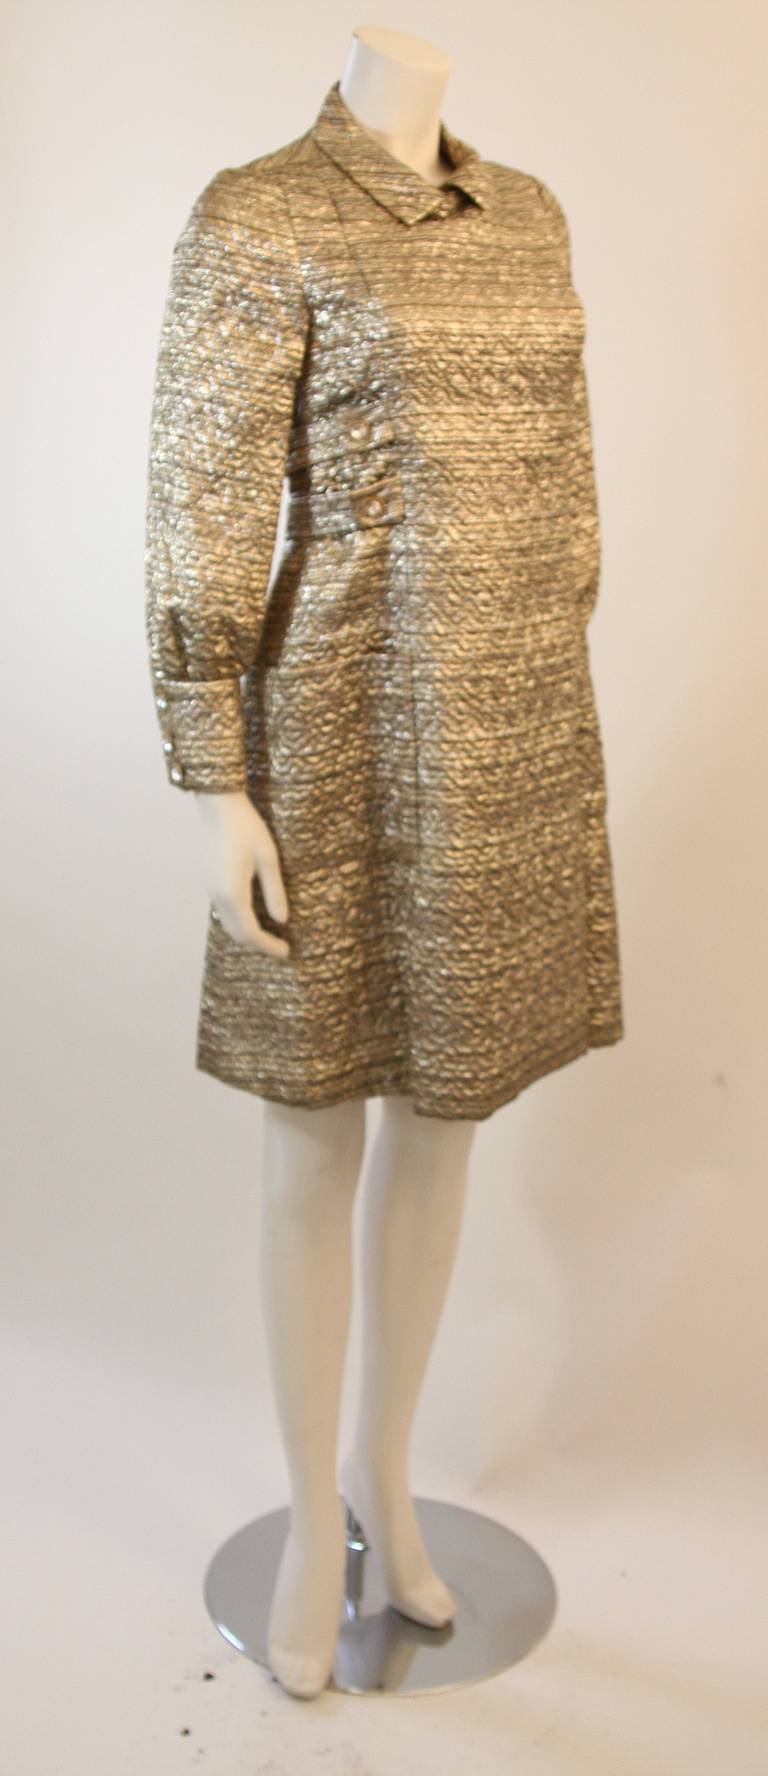 This is a chic Malcolm Starr design. This fantastic shift dress is composed of a wonderful metallic gold hued fabric accented with rhinestone buttons. The dress features button and snap closures. 

Measures (Approximately)
Length: 38